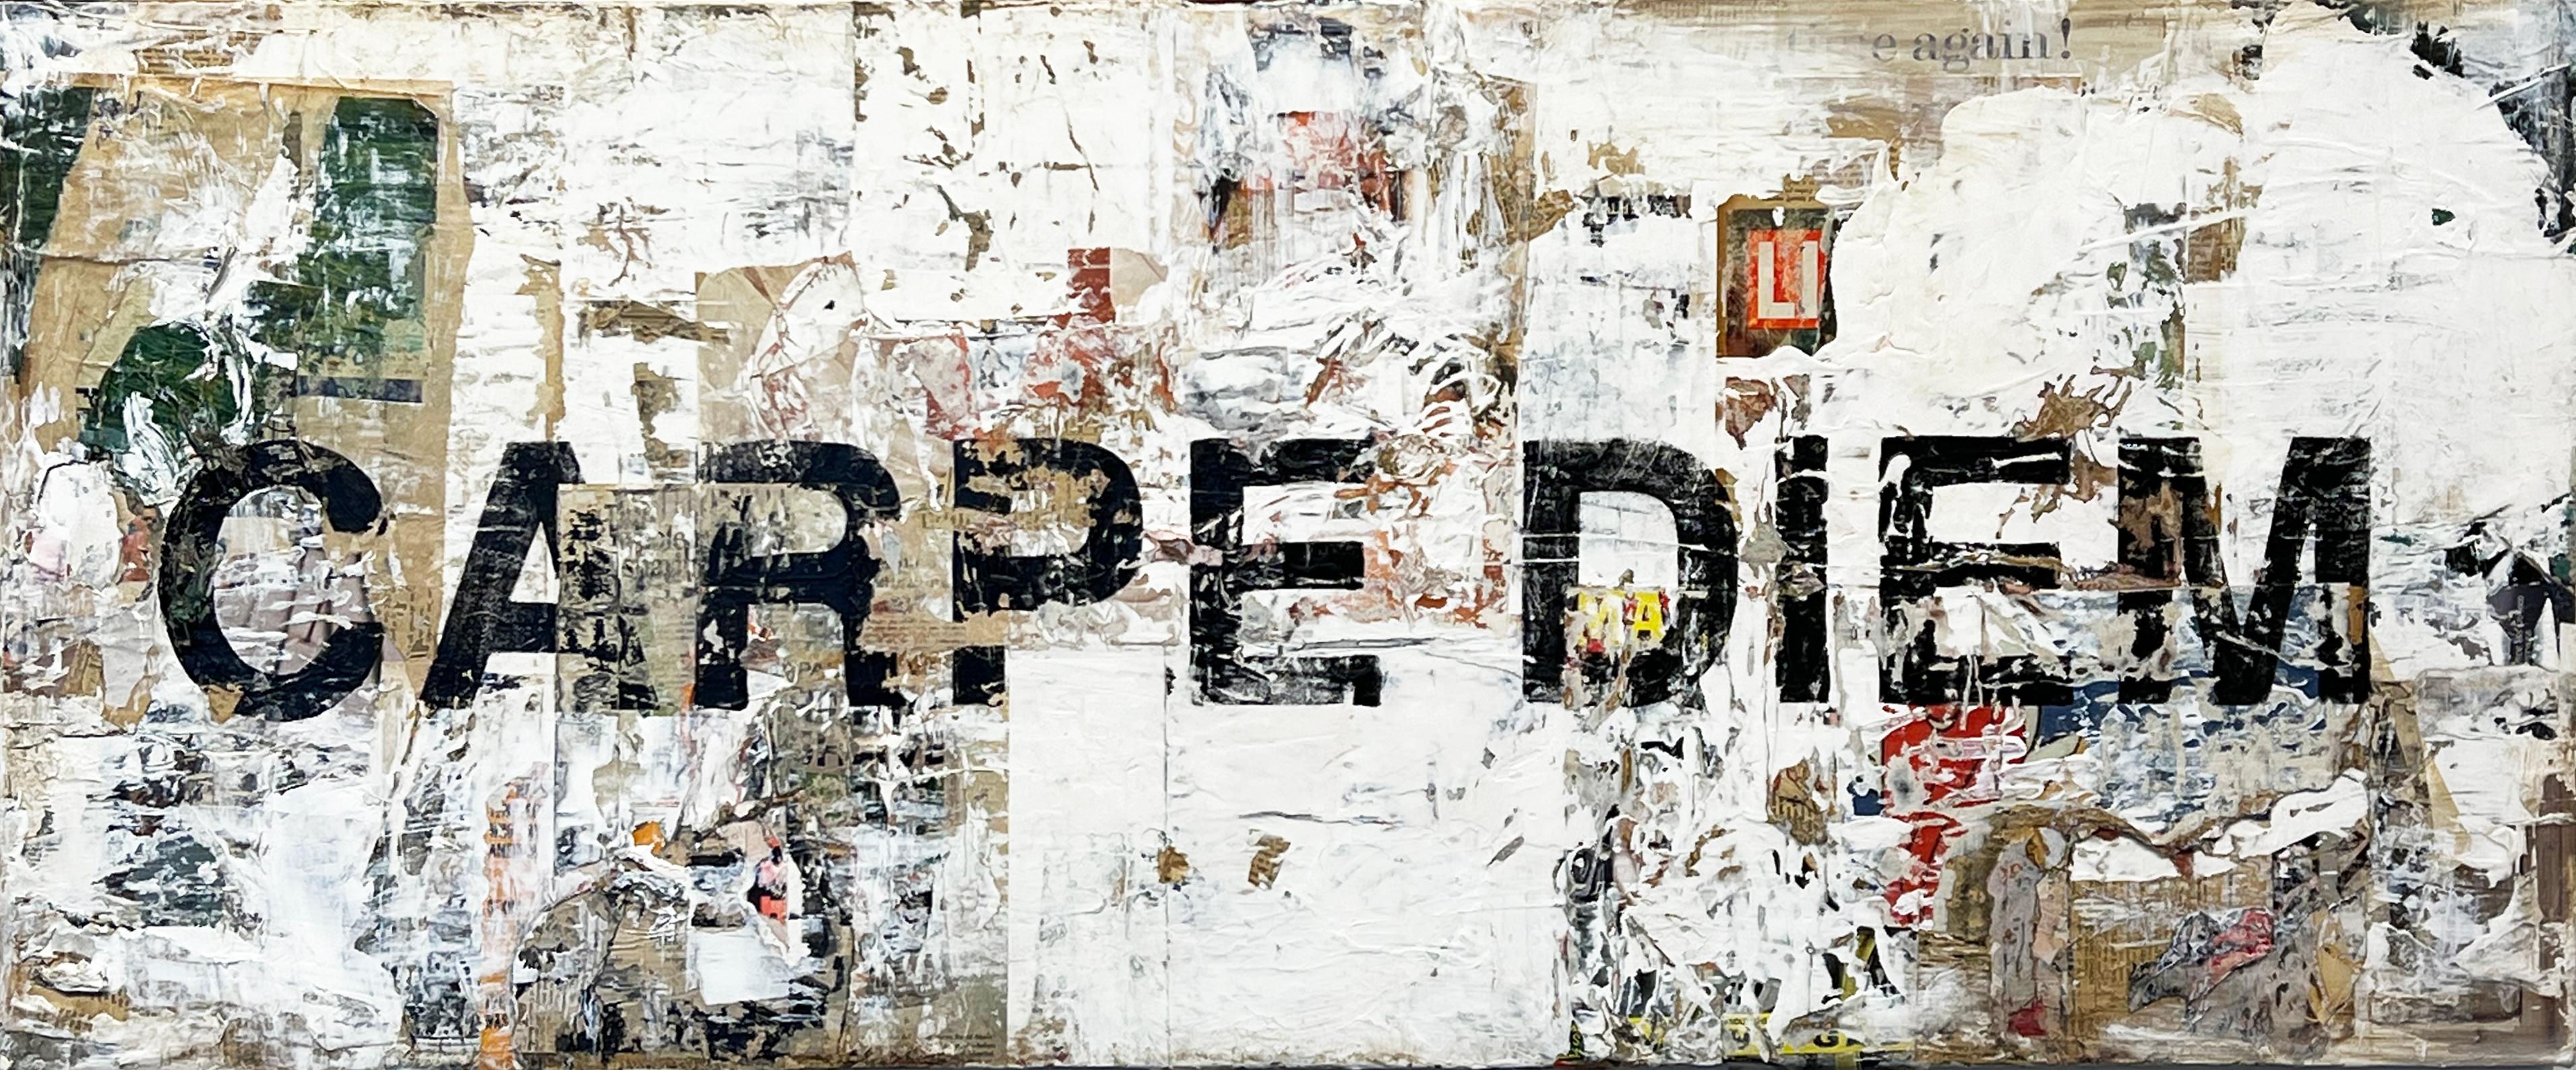 GREG MILLER
"Carpe Diem" 
Acrylic, Collage
24 x 60 in.

Drawing from the diverse cultural and geographic makeup of his Californian roots, Greg Miller explores his relationship with the space he inhabits to communicate a particular urban experience.